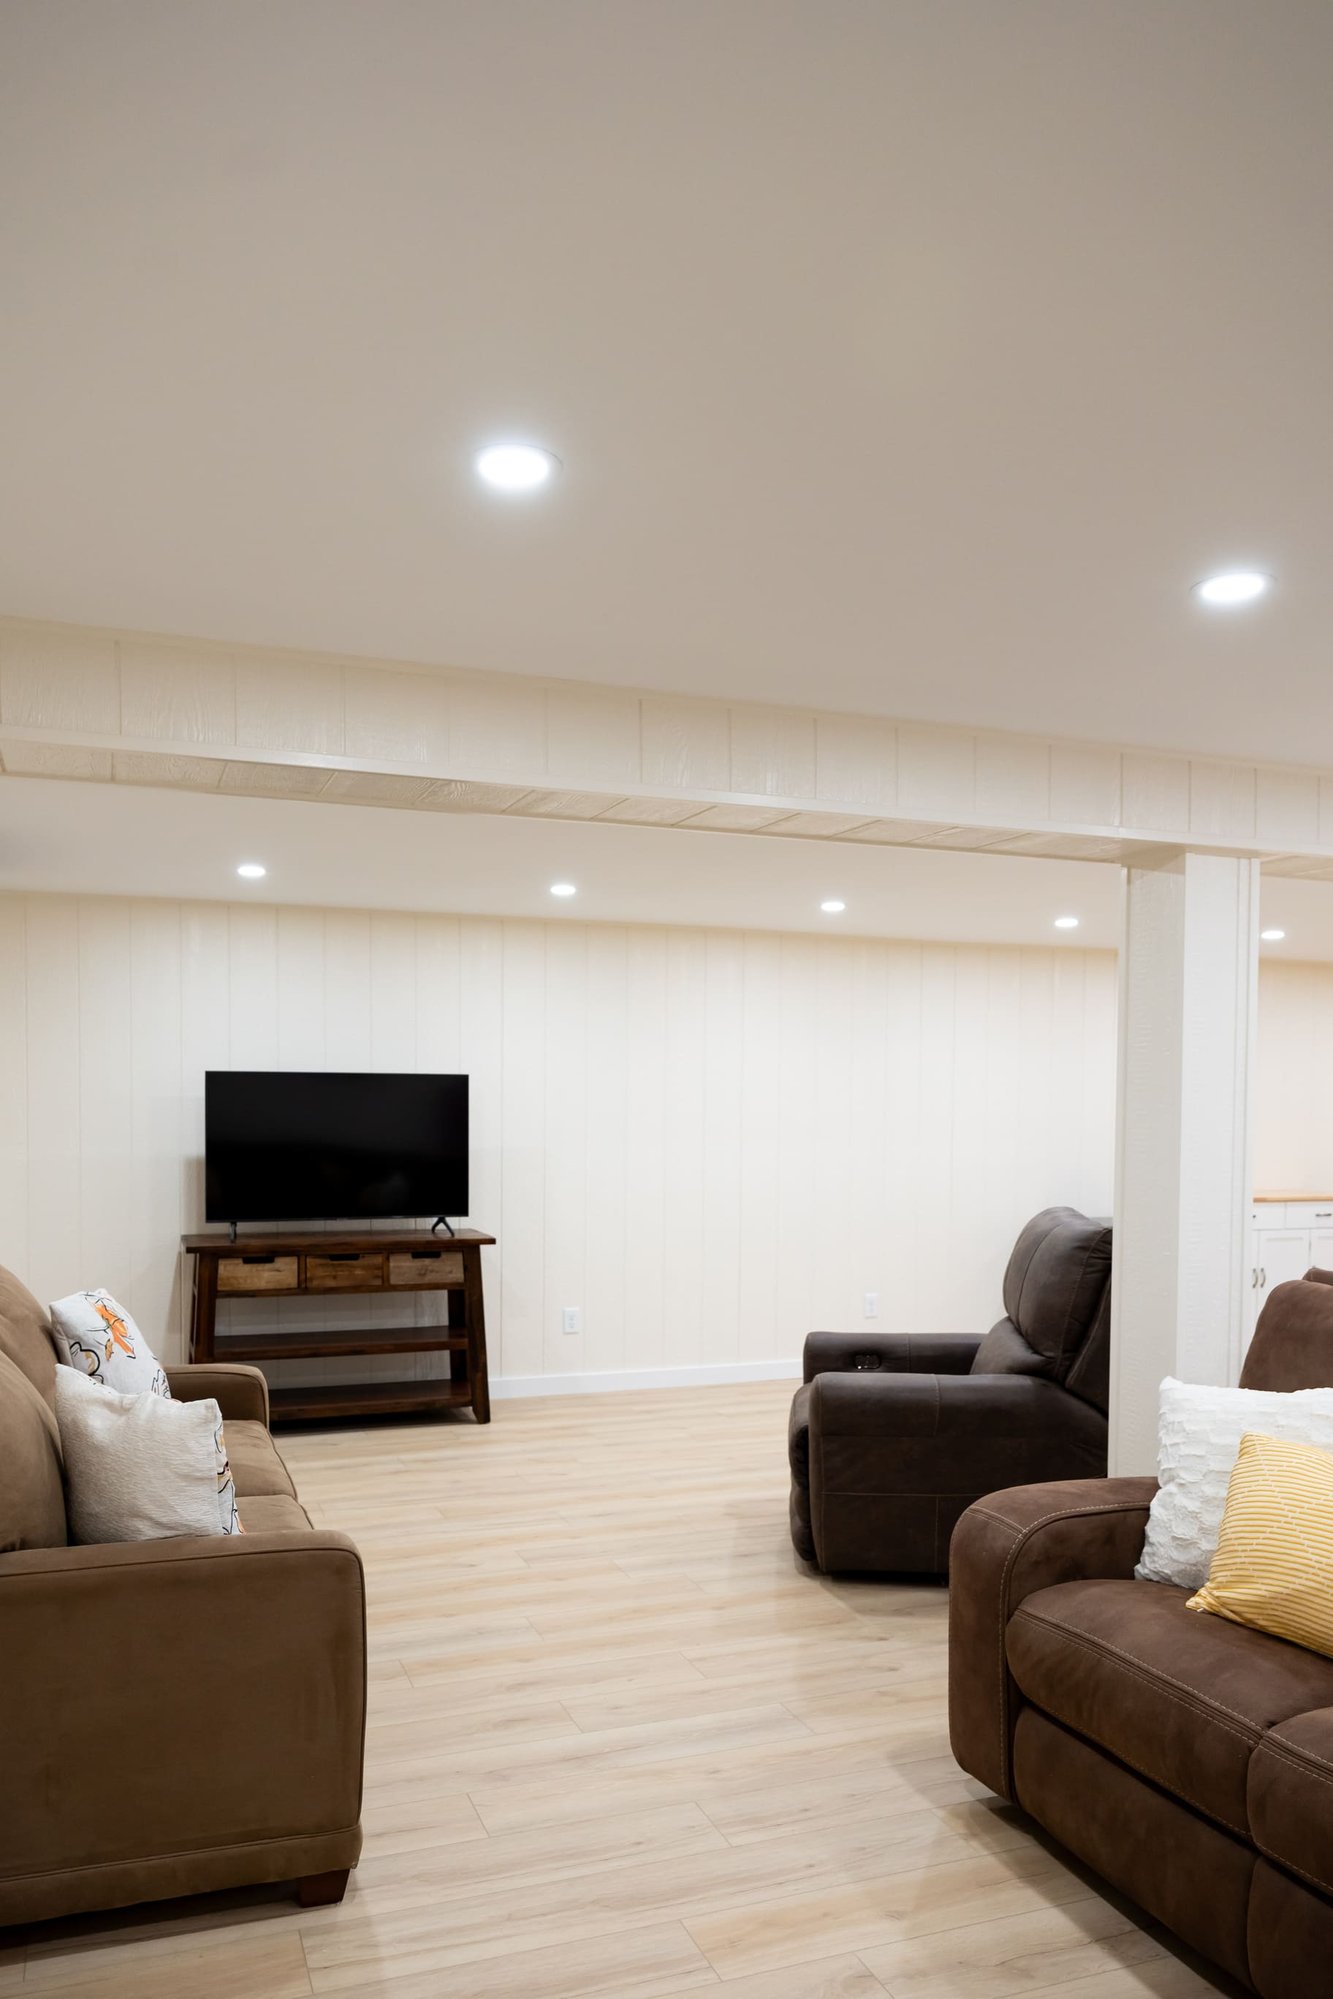 Brown couches, tv on dark wood stand in open white basement remodel with recessed lighting